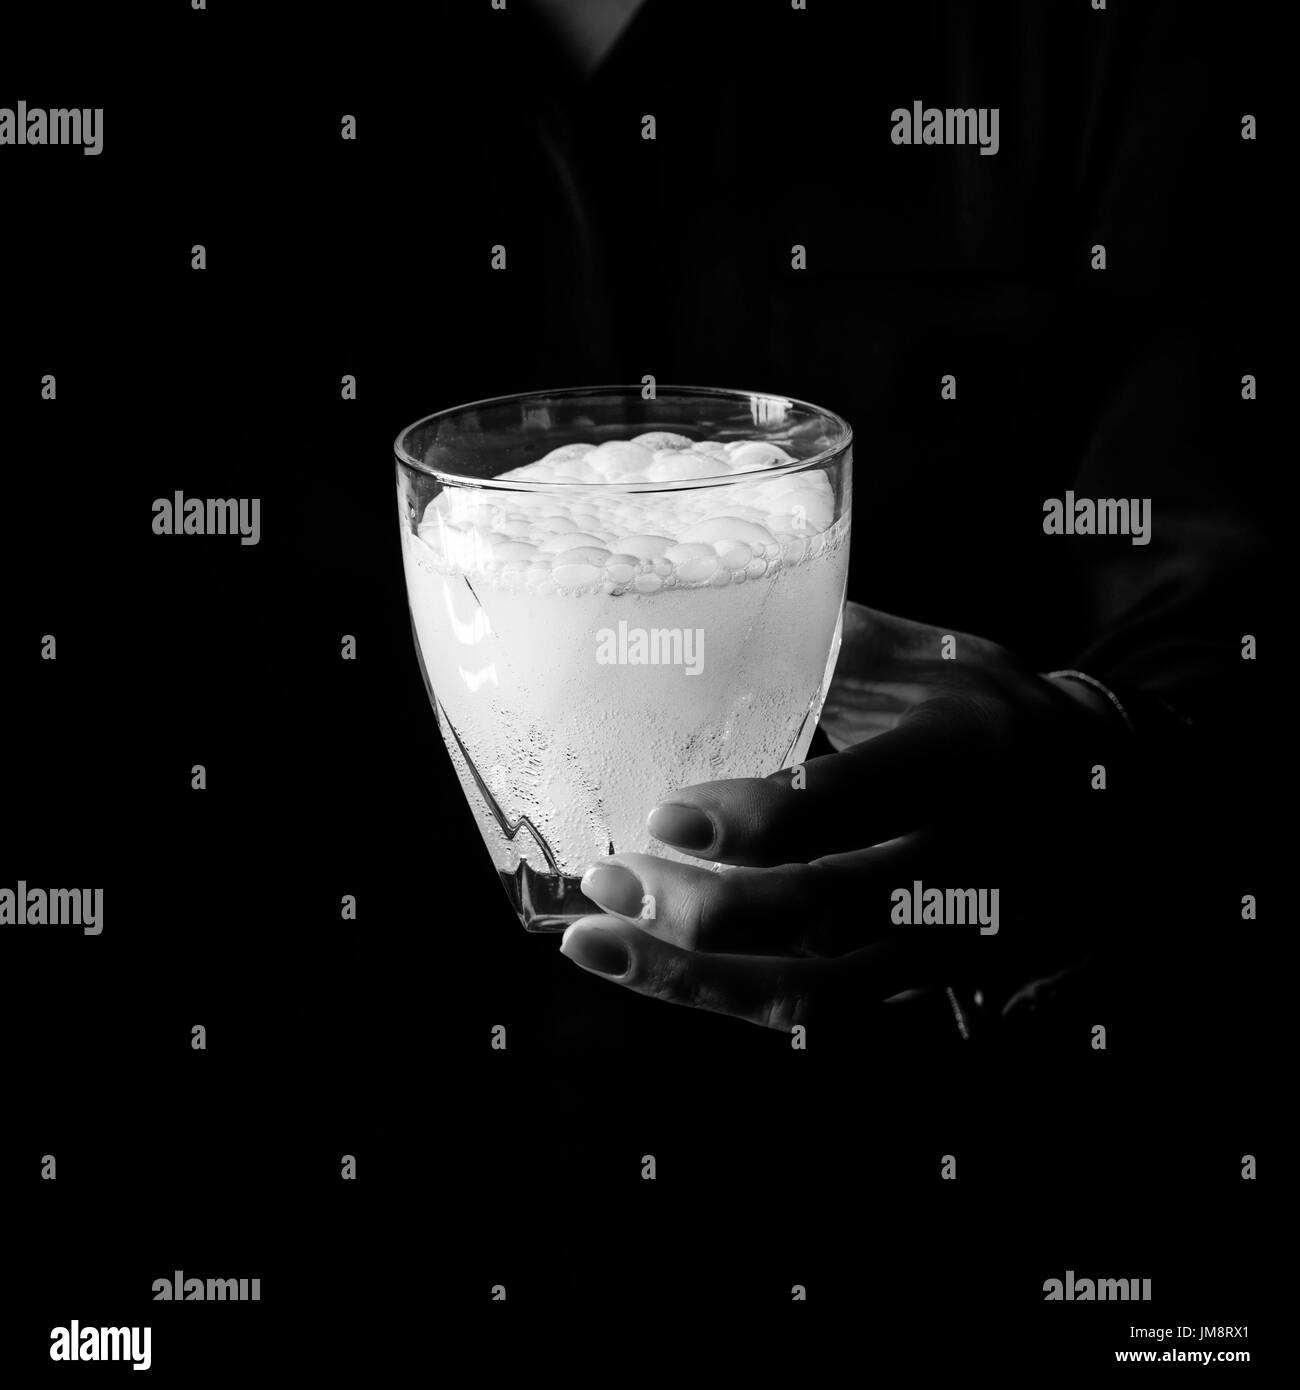 Black Mania. woman hand isolated on black background showing glass of water with effervescent tablet Stock Photo